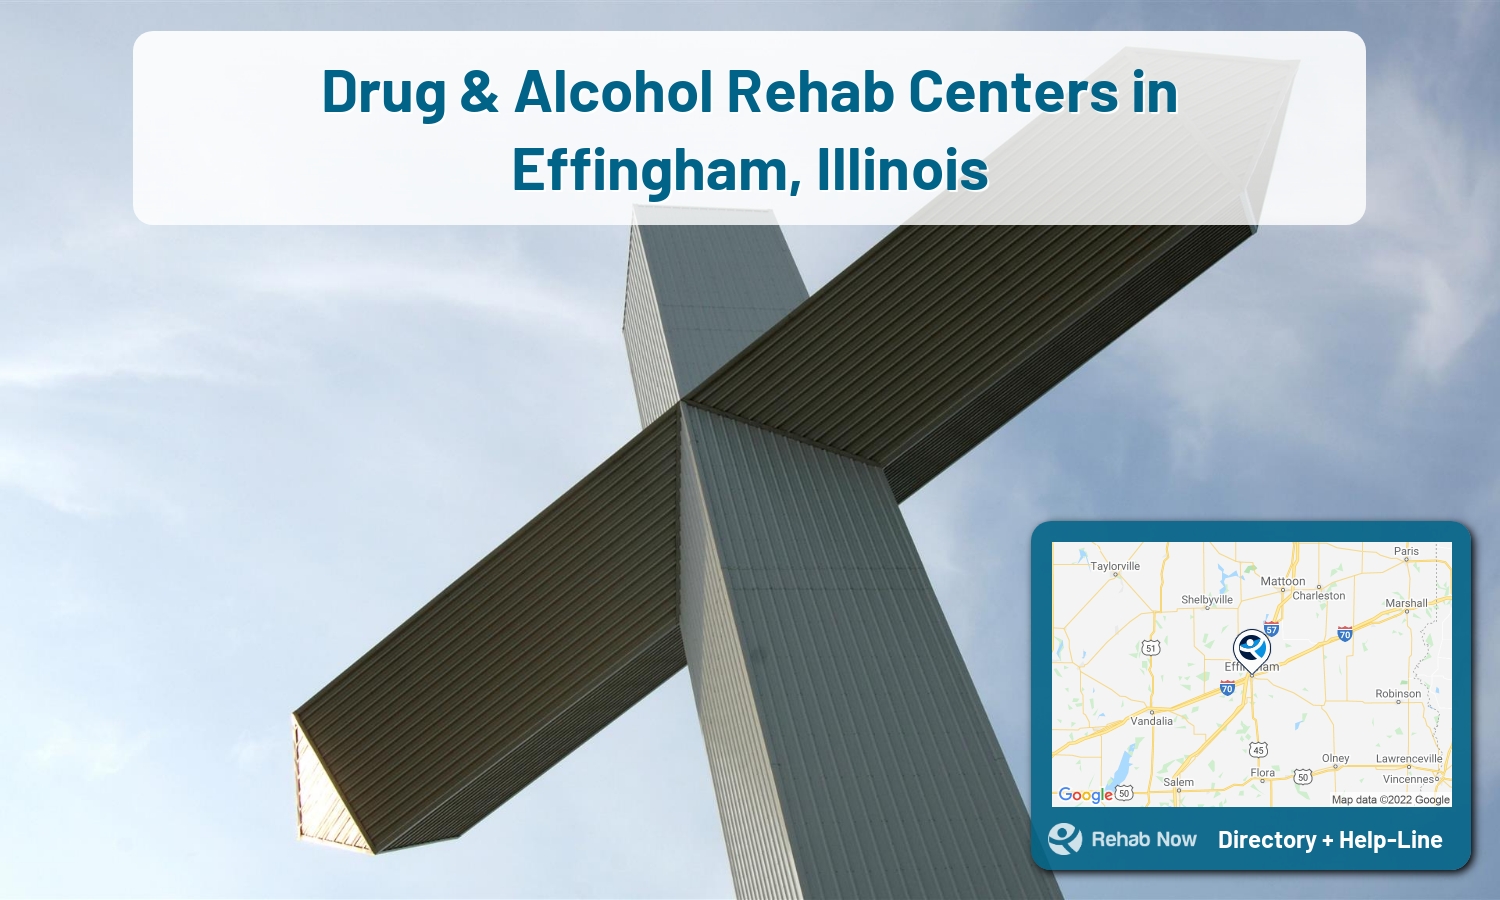 Ready to pick a rehab center in Effingham? Get off alcohol, opiates, and other drugs, by selecting top drug rehab centers in Illinois